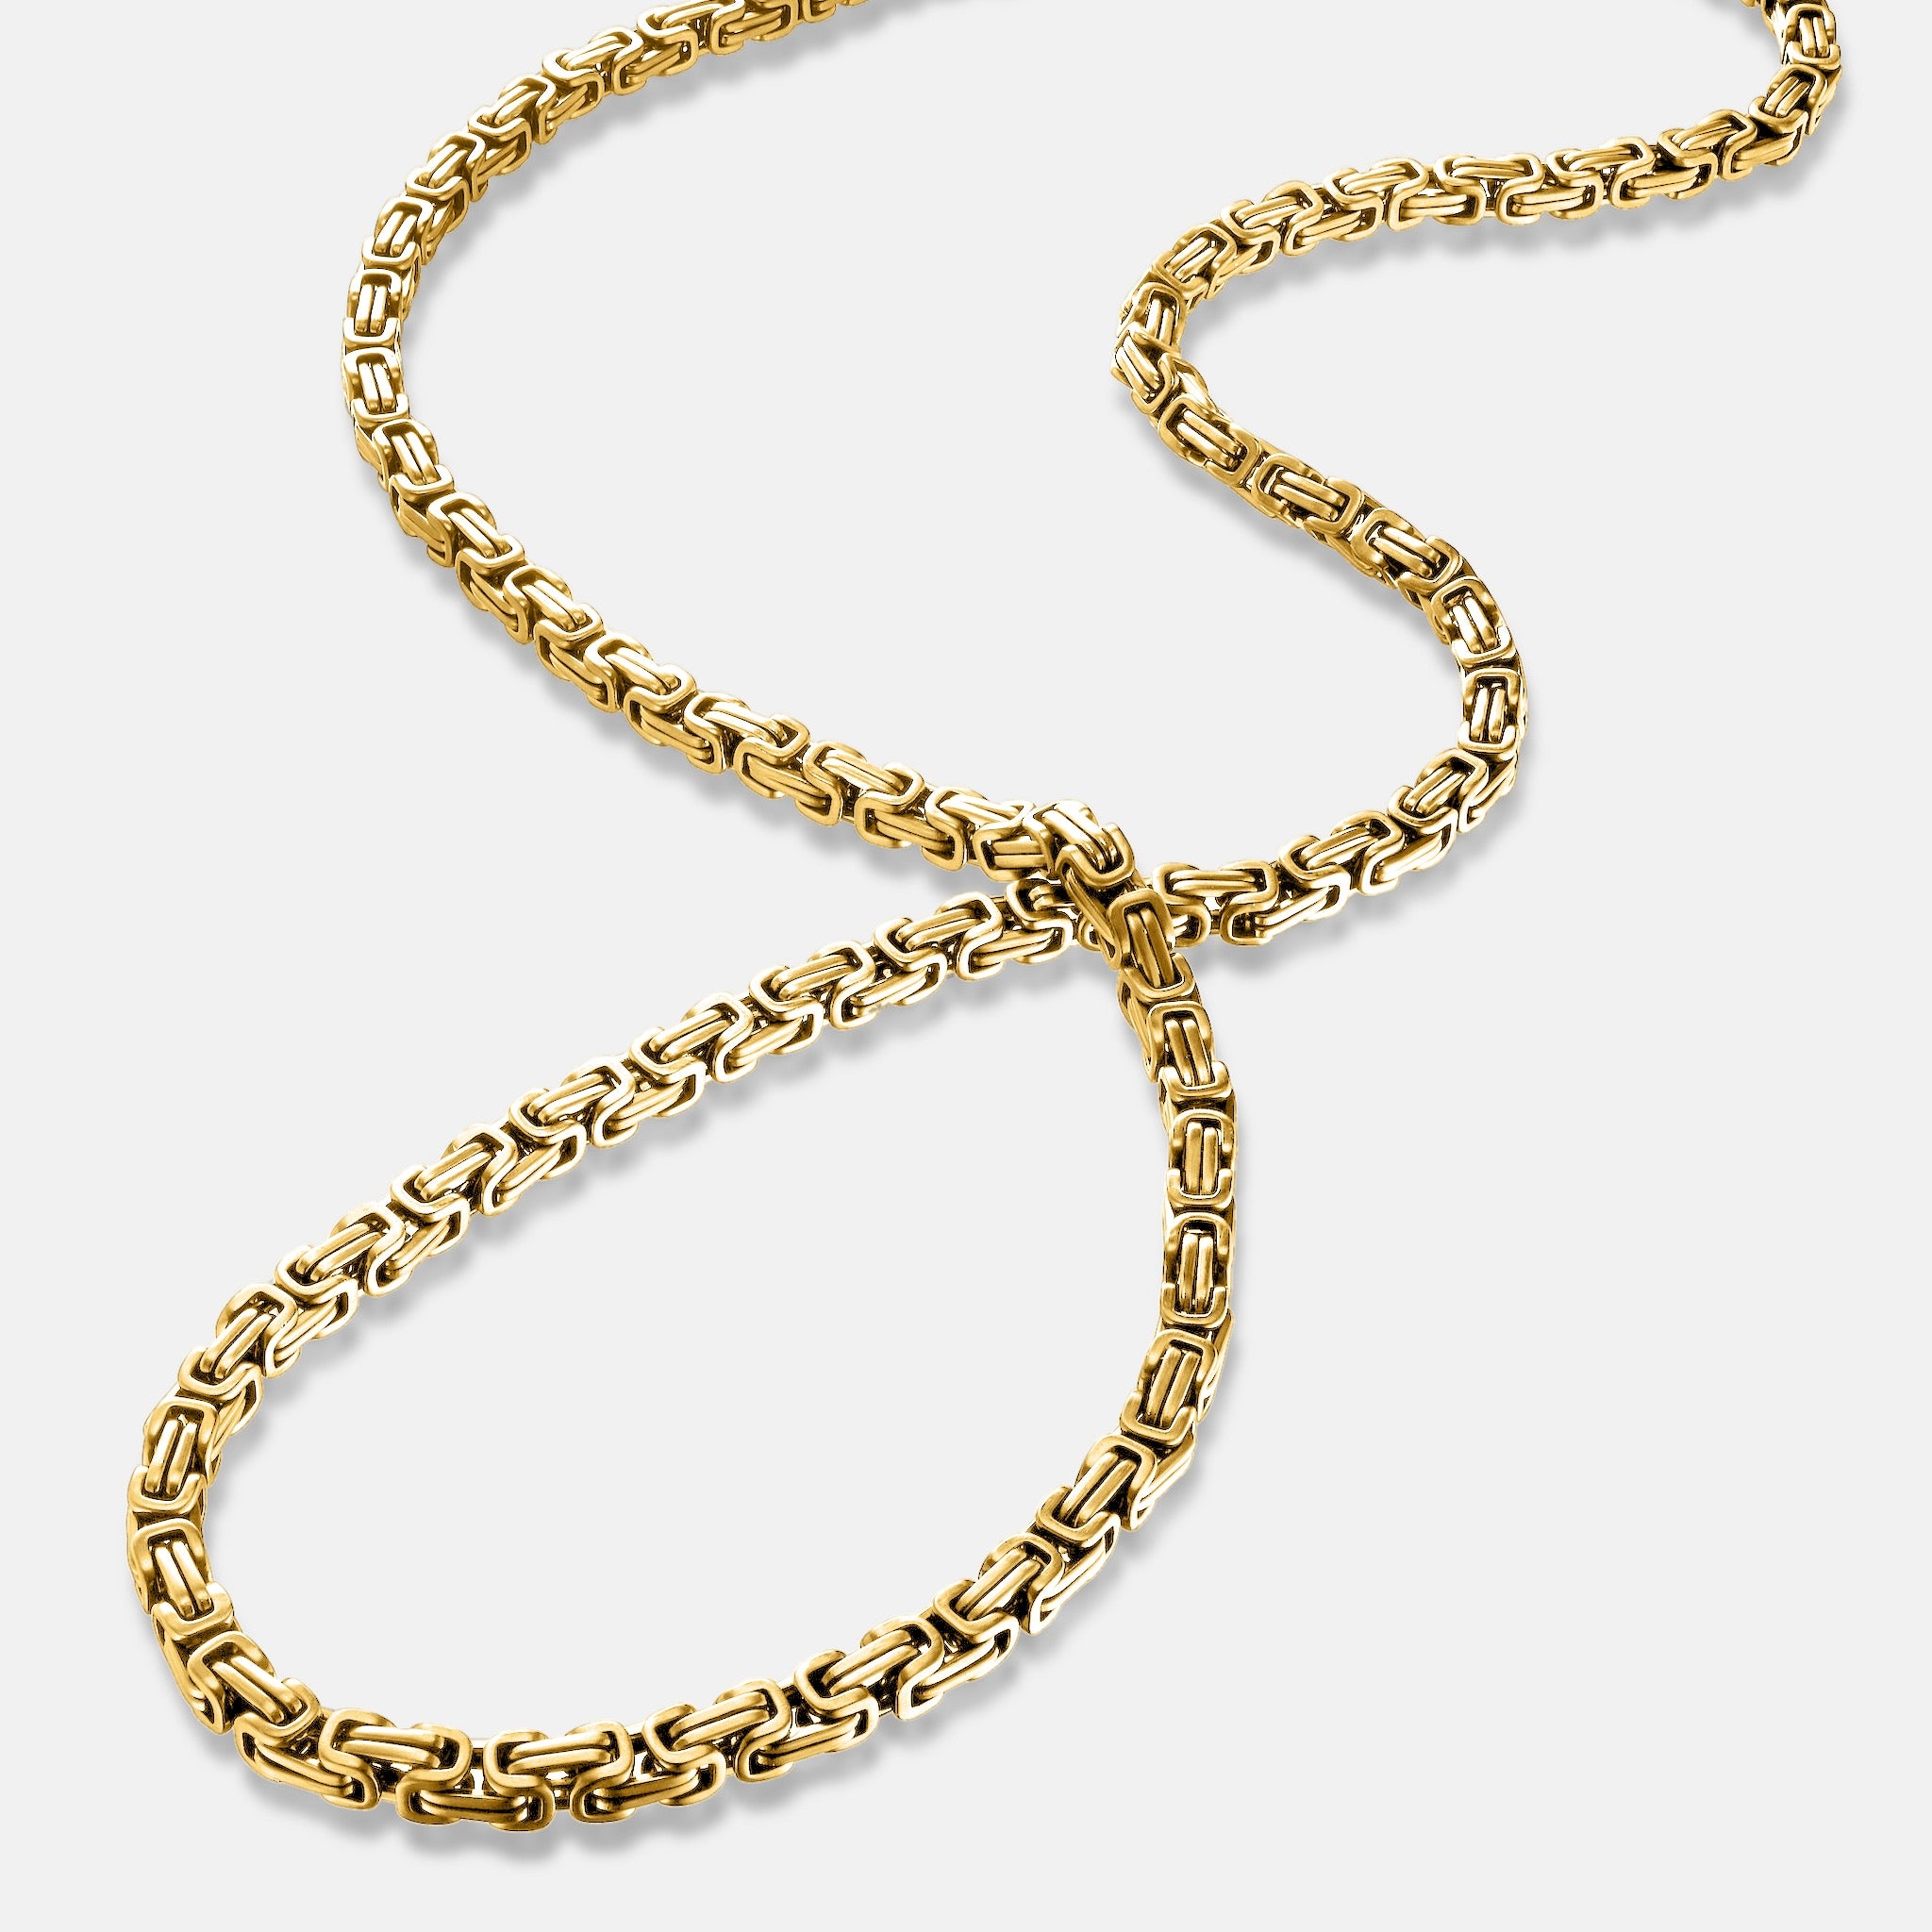 K12 - GOLD KING CHAIN - 4.2MM